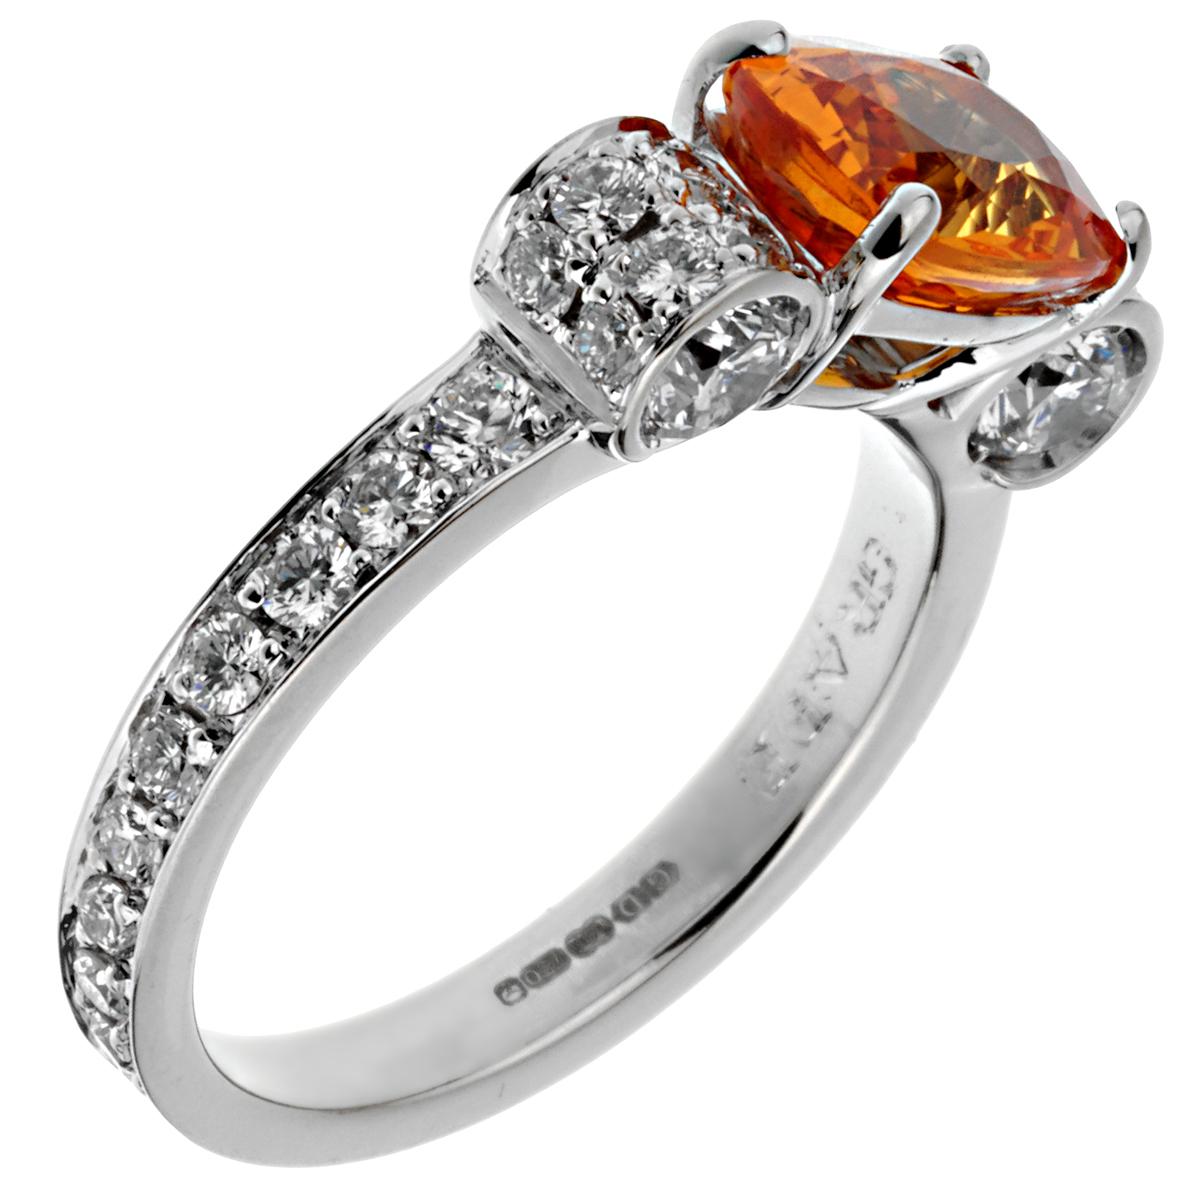 An incredible Graff ring showcasing a 2.45ct cushion cut Orange Sapphire flanked by 1.53cts of the finest round brilliant cut diamonds in 18k white gold. The ring measures a size 6 1/2 and can be resized if needed. The Orange sapphire very bright